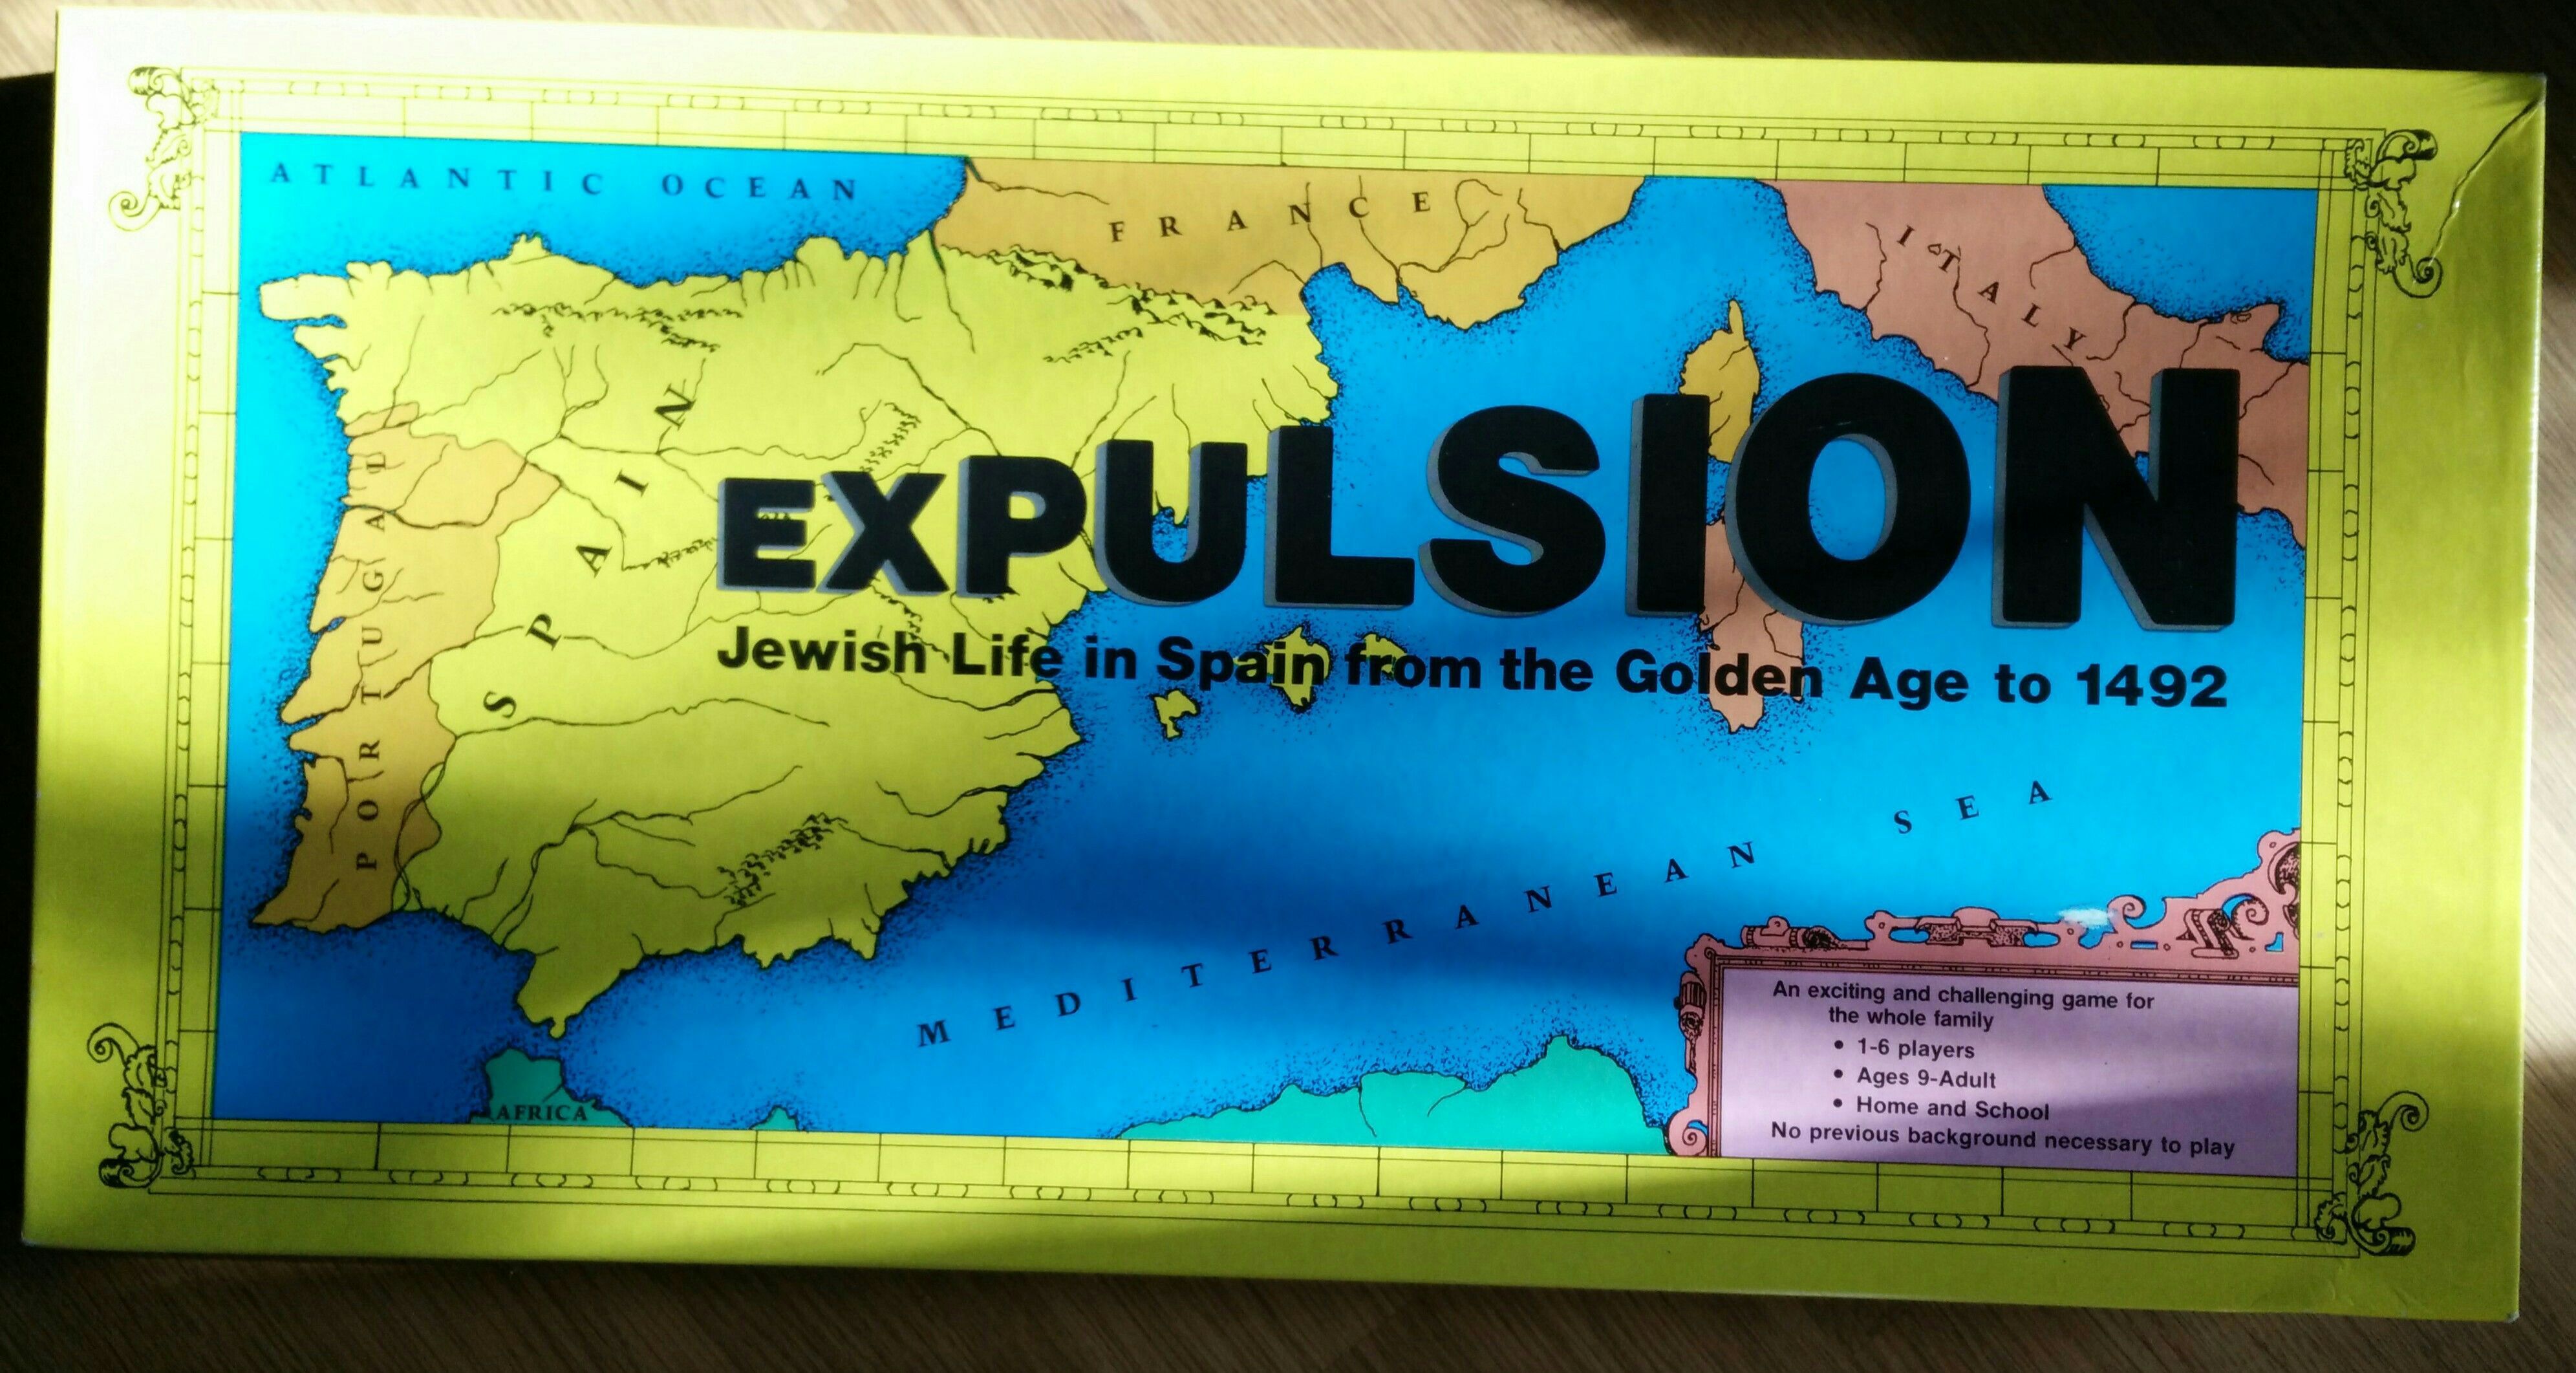 Expulsion: Jewish Life in Spain from the Golden Age to 1492